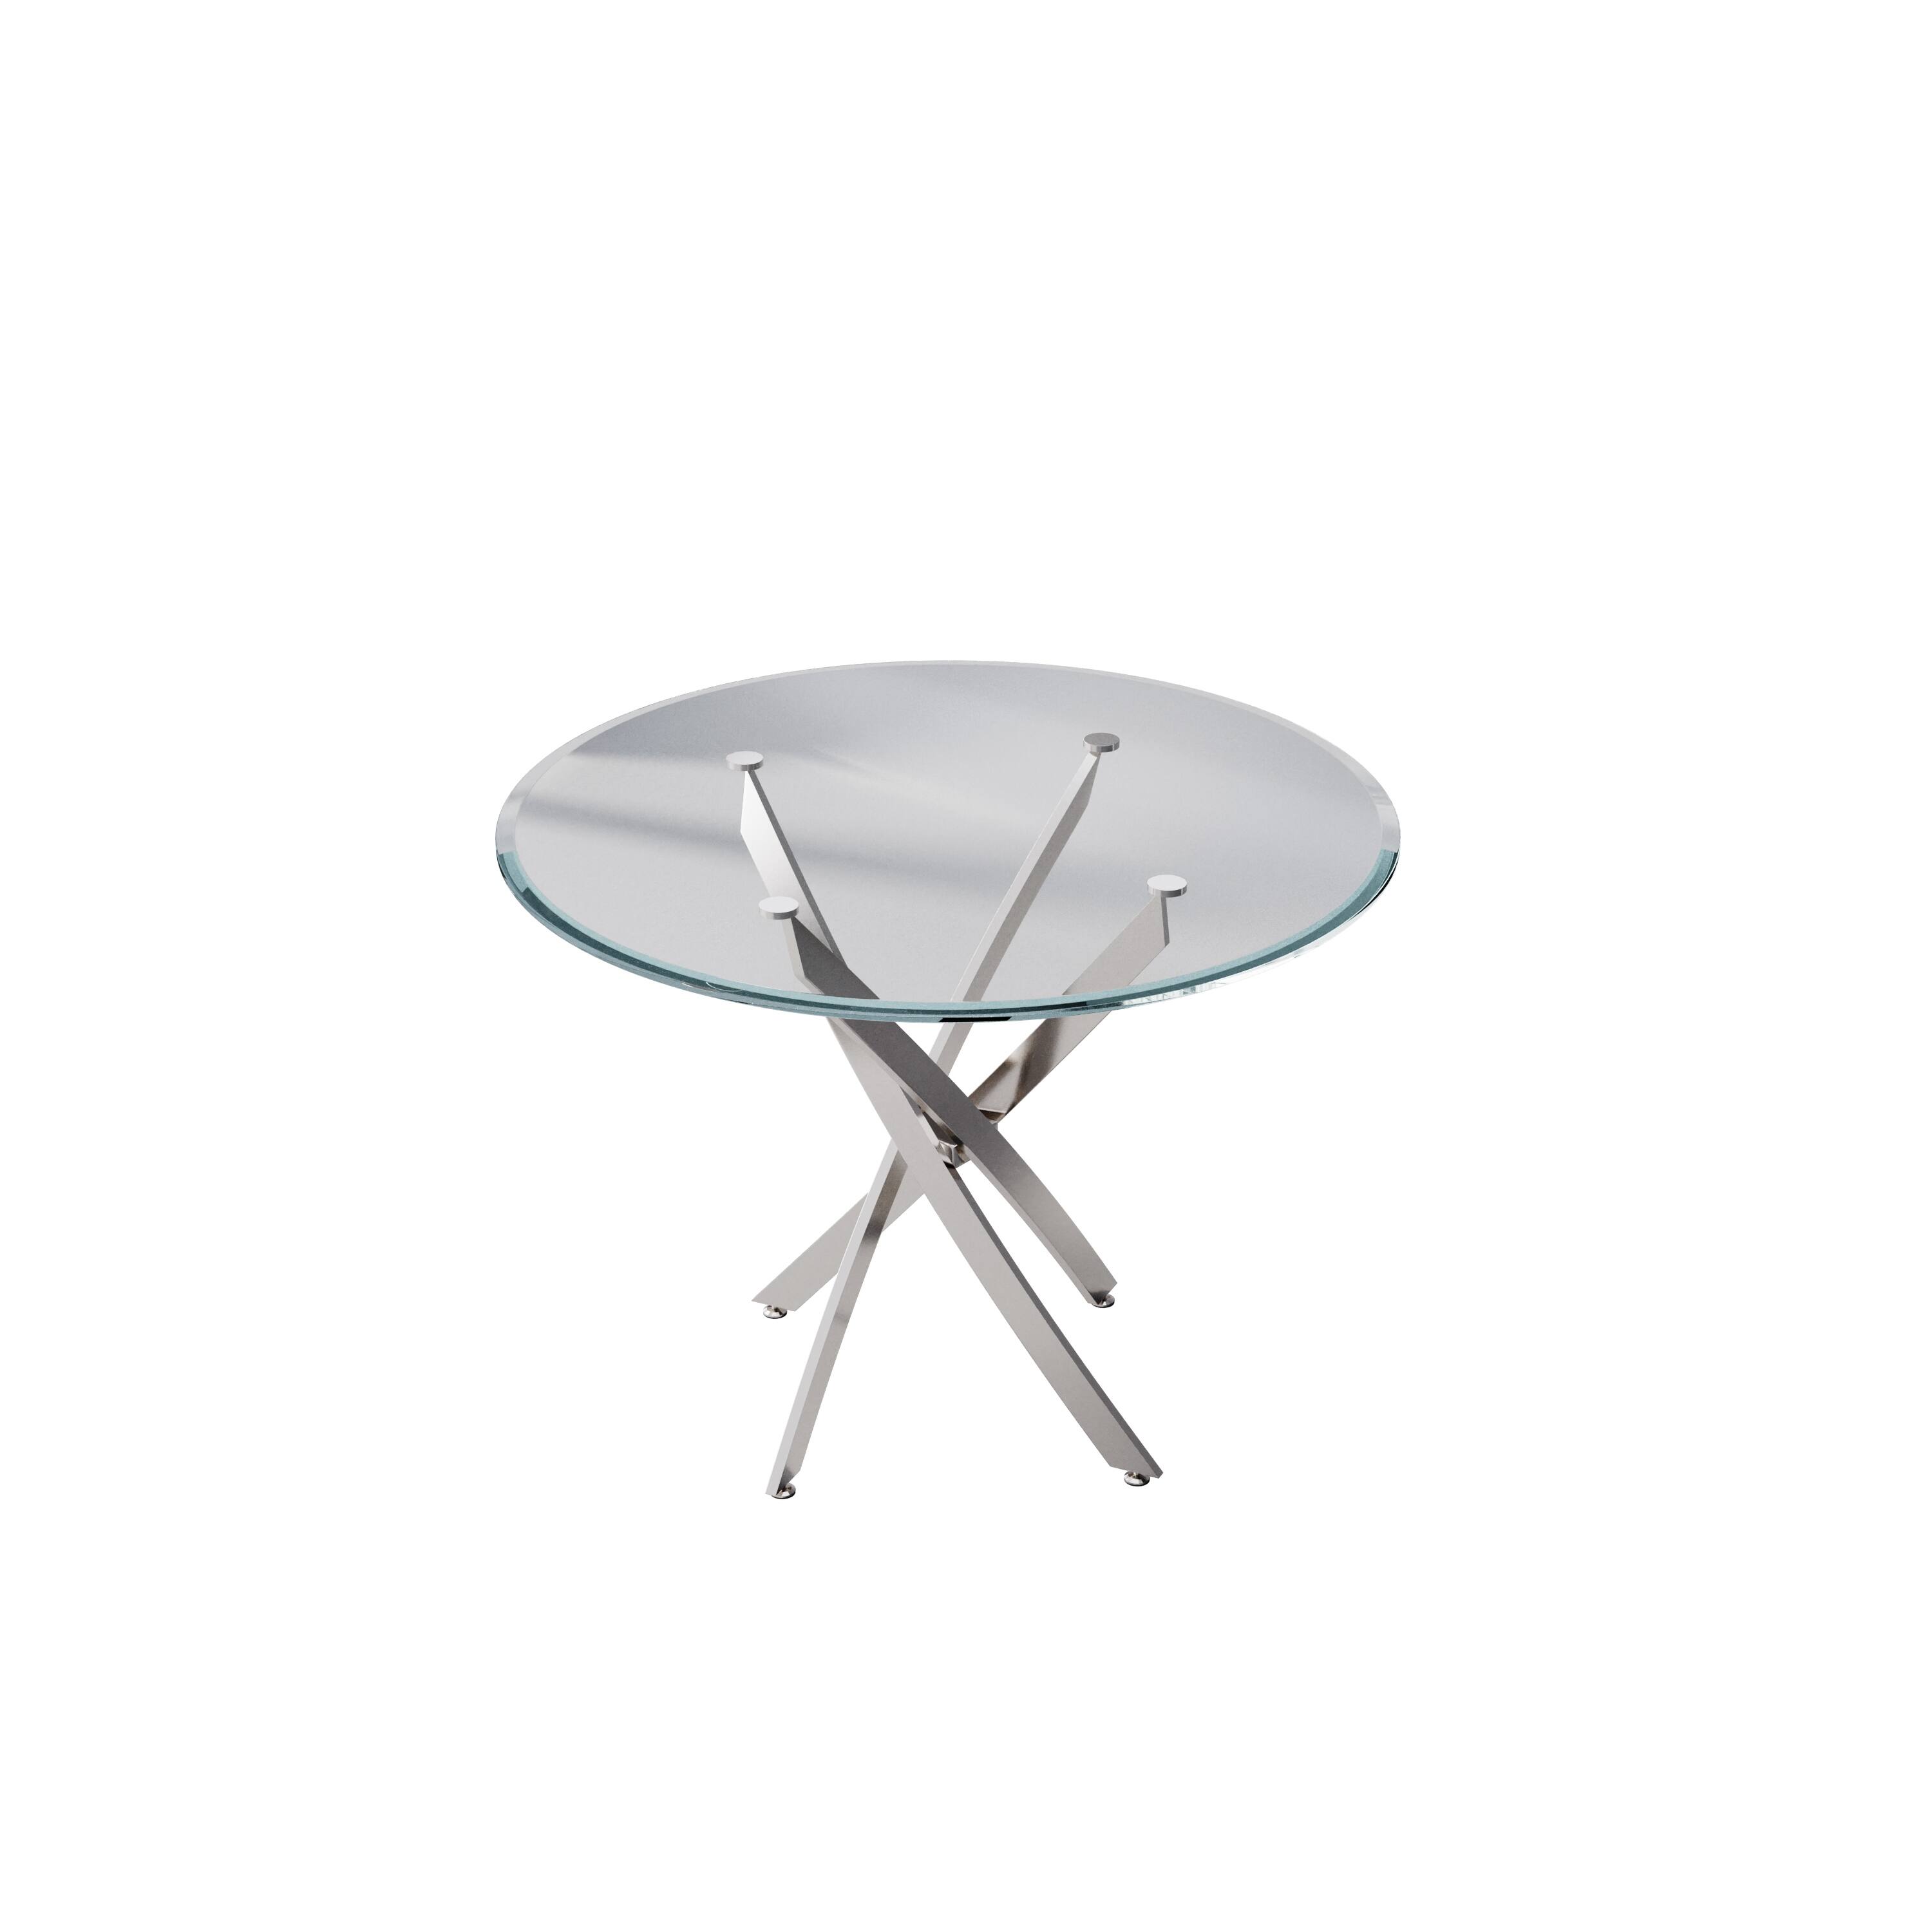 Circle Tempered Glass Top Dining Table with Chrome Legs for Dining